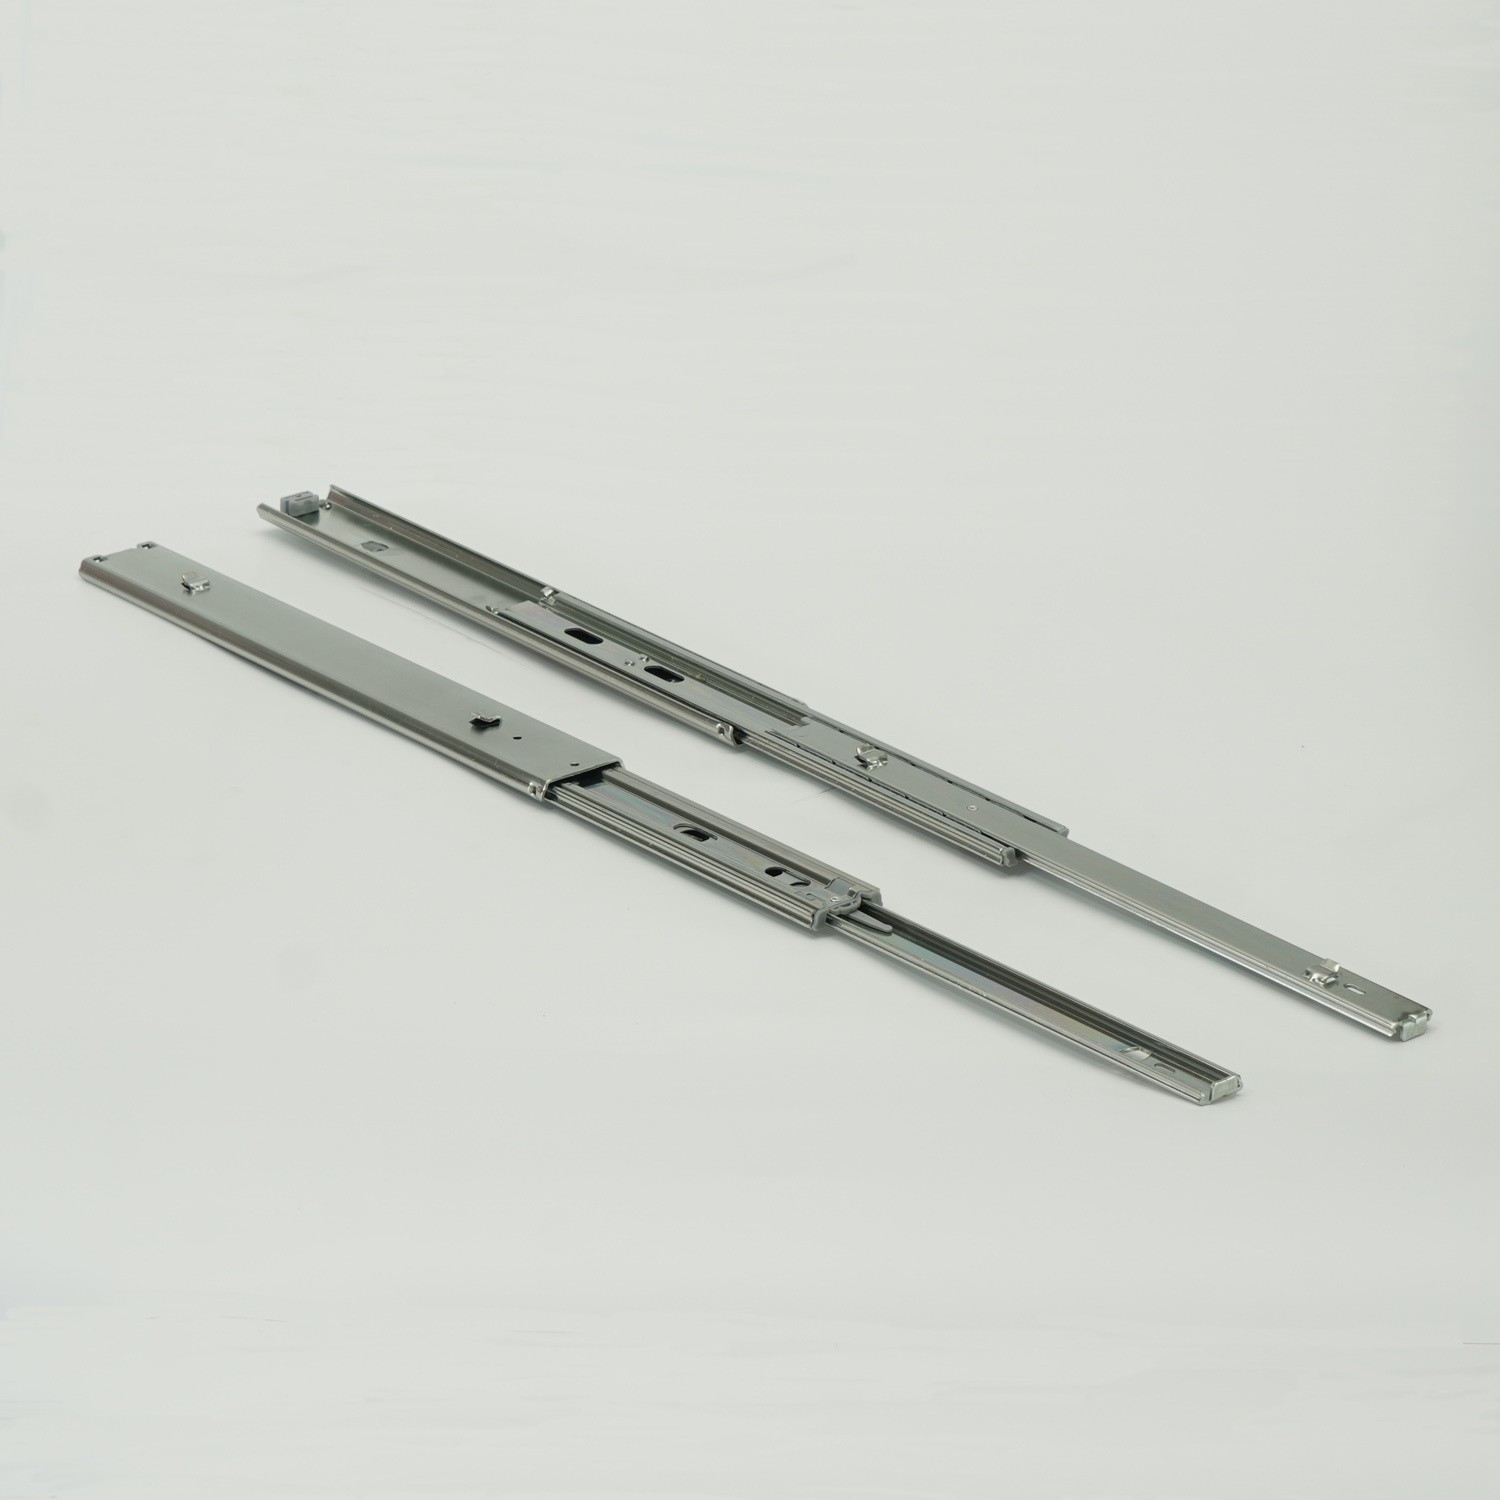 51mm Plug-in Full Extension Ball Bearing Drawer Slide (drawer rail) with Hooks (bayonet joint)